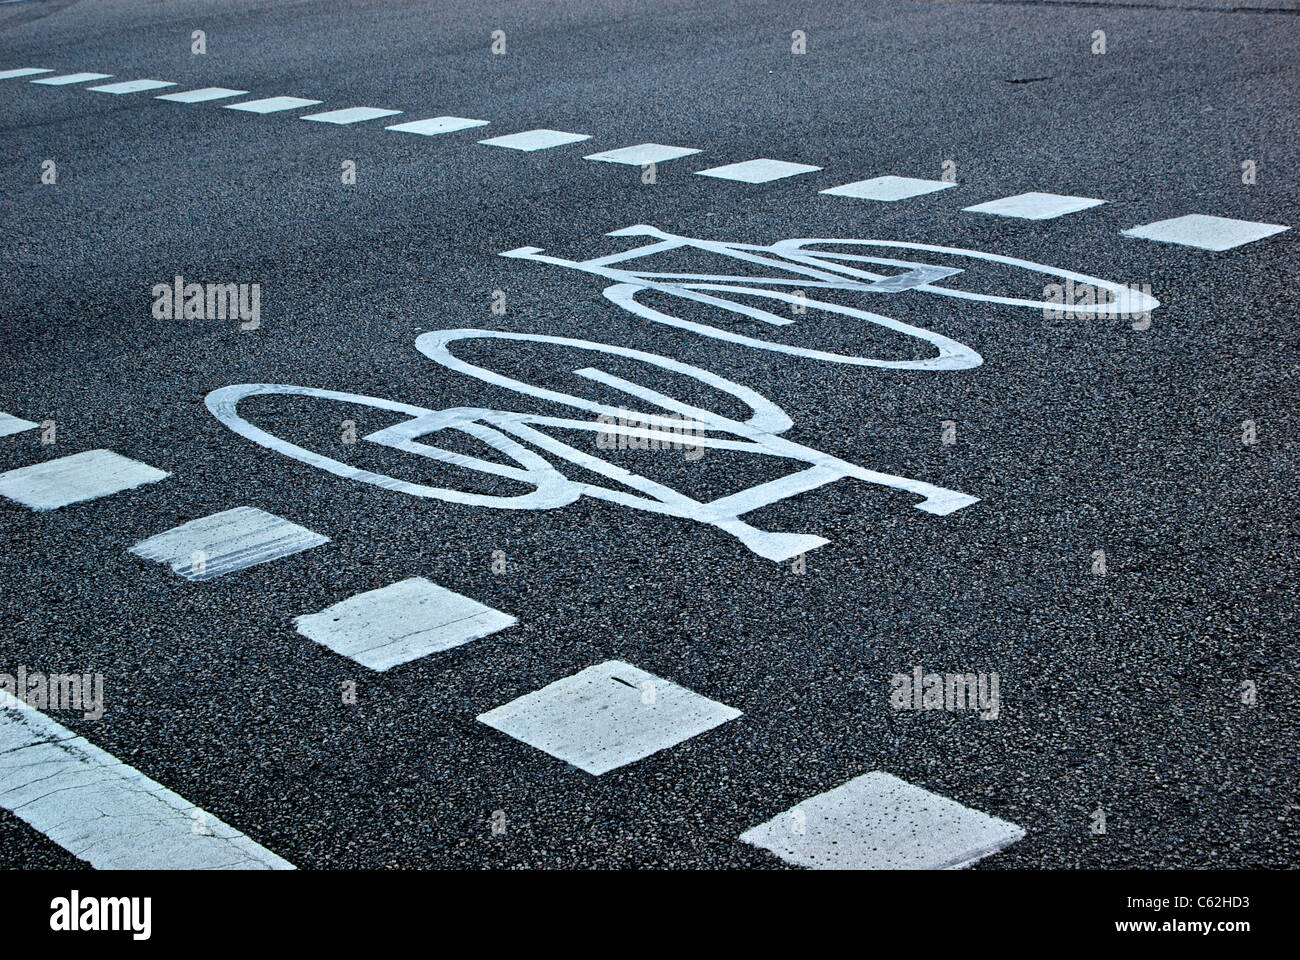 Dedicated bicycle lane painted marking Hornby Street Vancouver Stock Photo